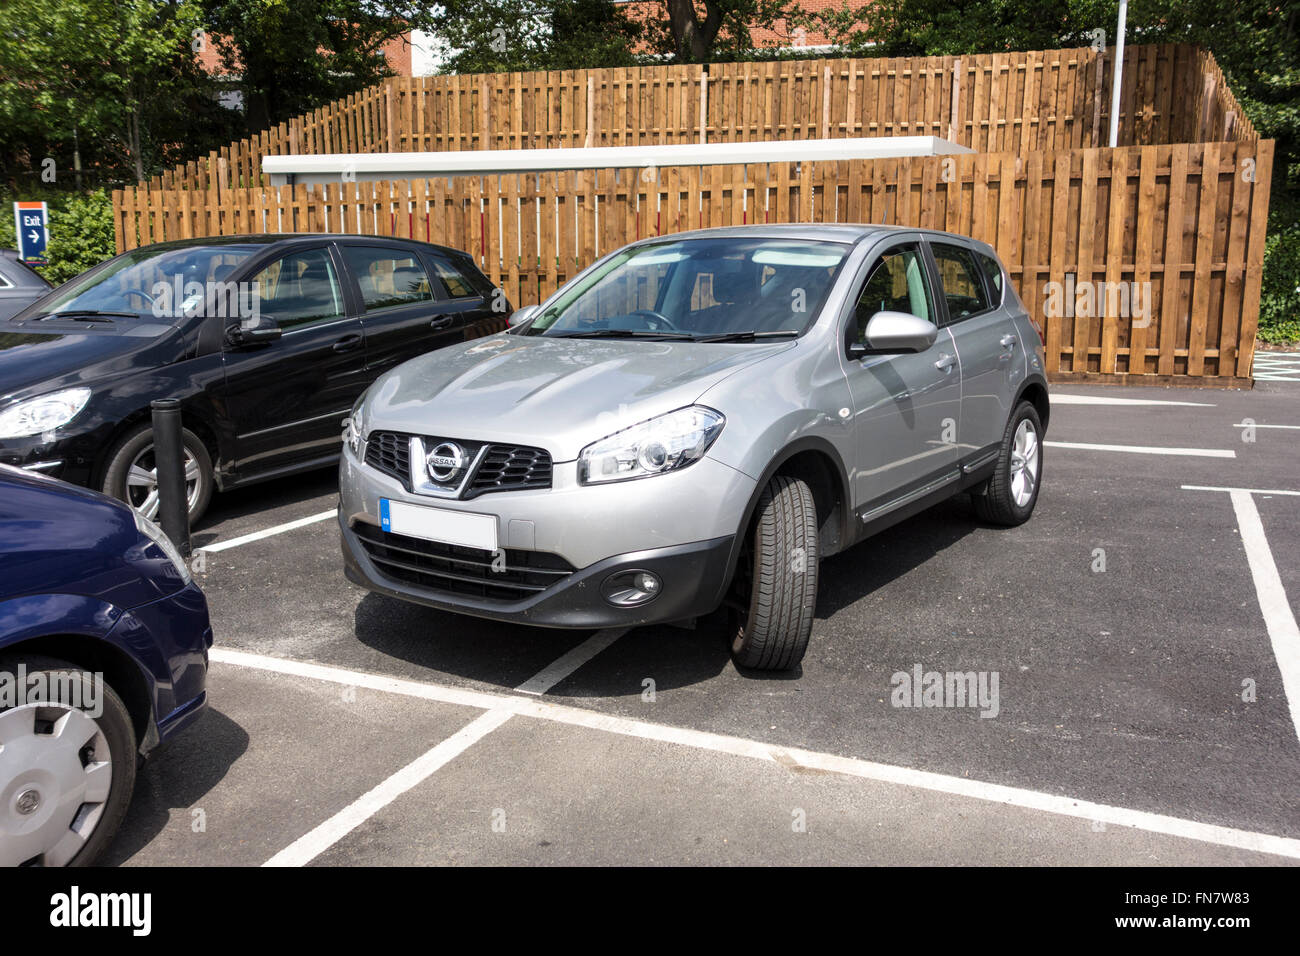 Inconsiderate parking in a car park, UK. Stock Photo